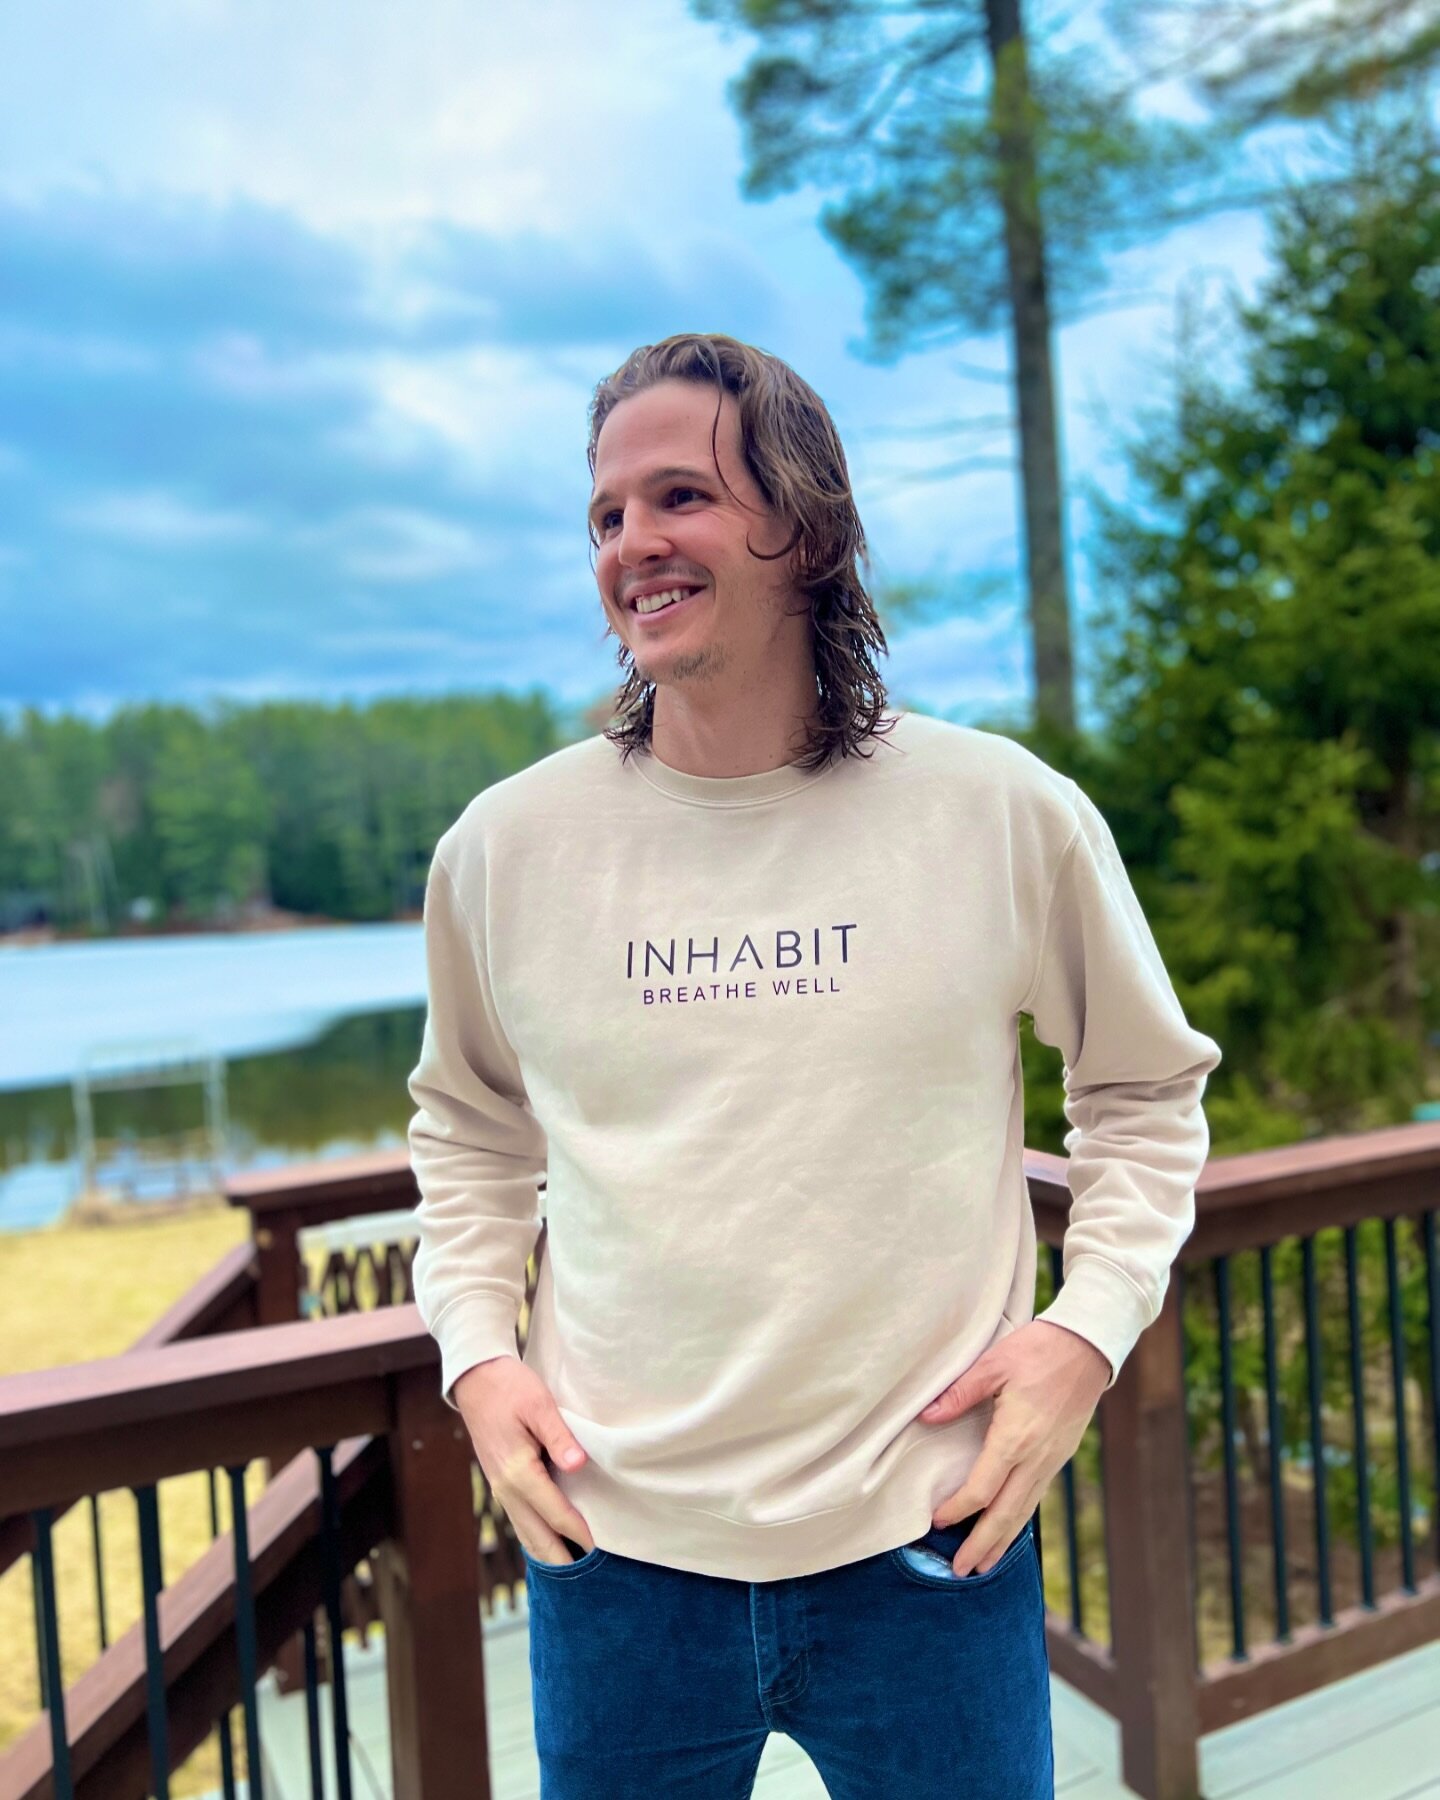 INHABIT merch dropping this month! Stay tuned friends.

Breathe Well🙏🏻

&bull;&bull;&bull;&bull;&bull;
#newmerch #breathe #adirondacks